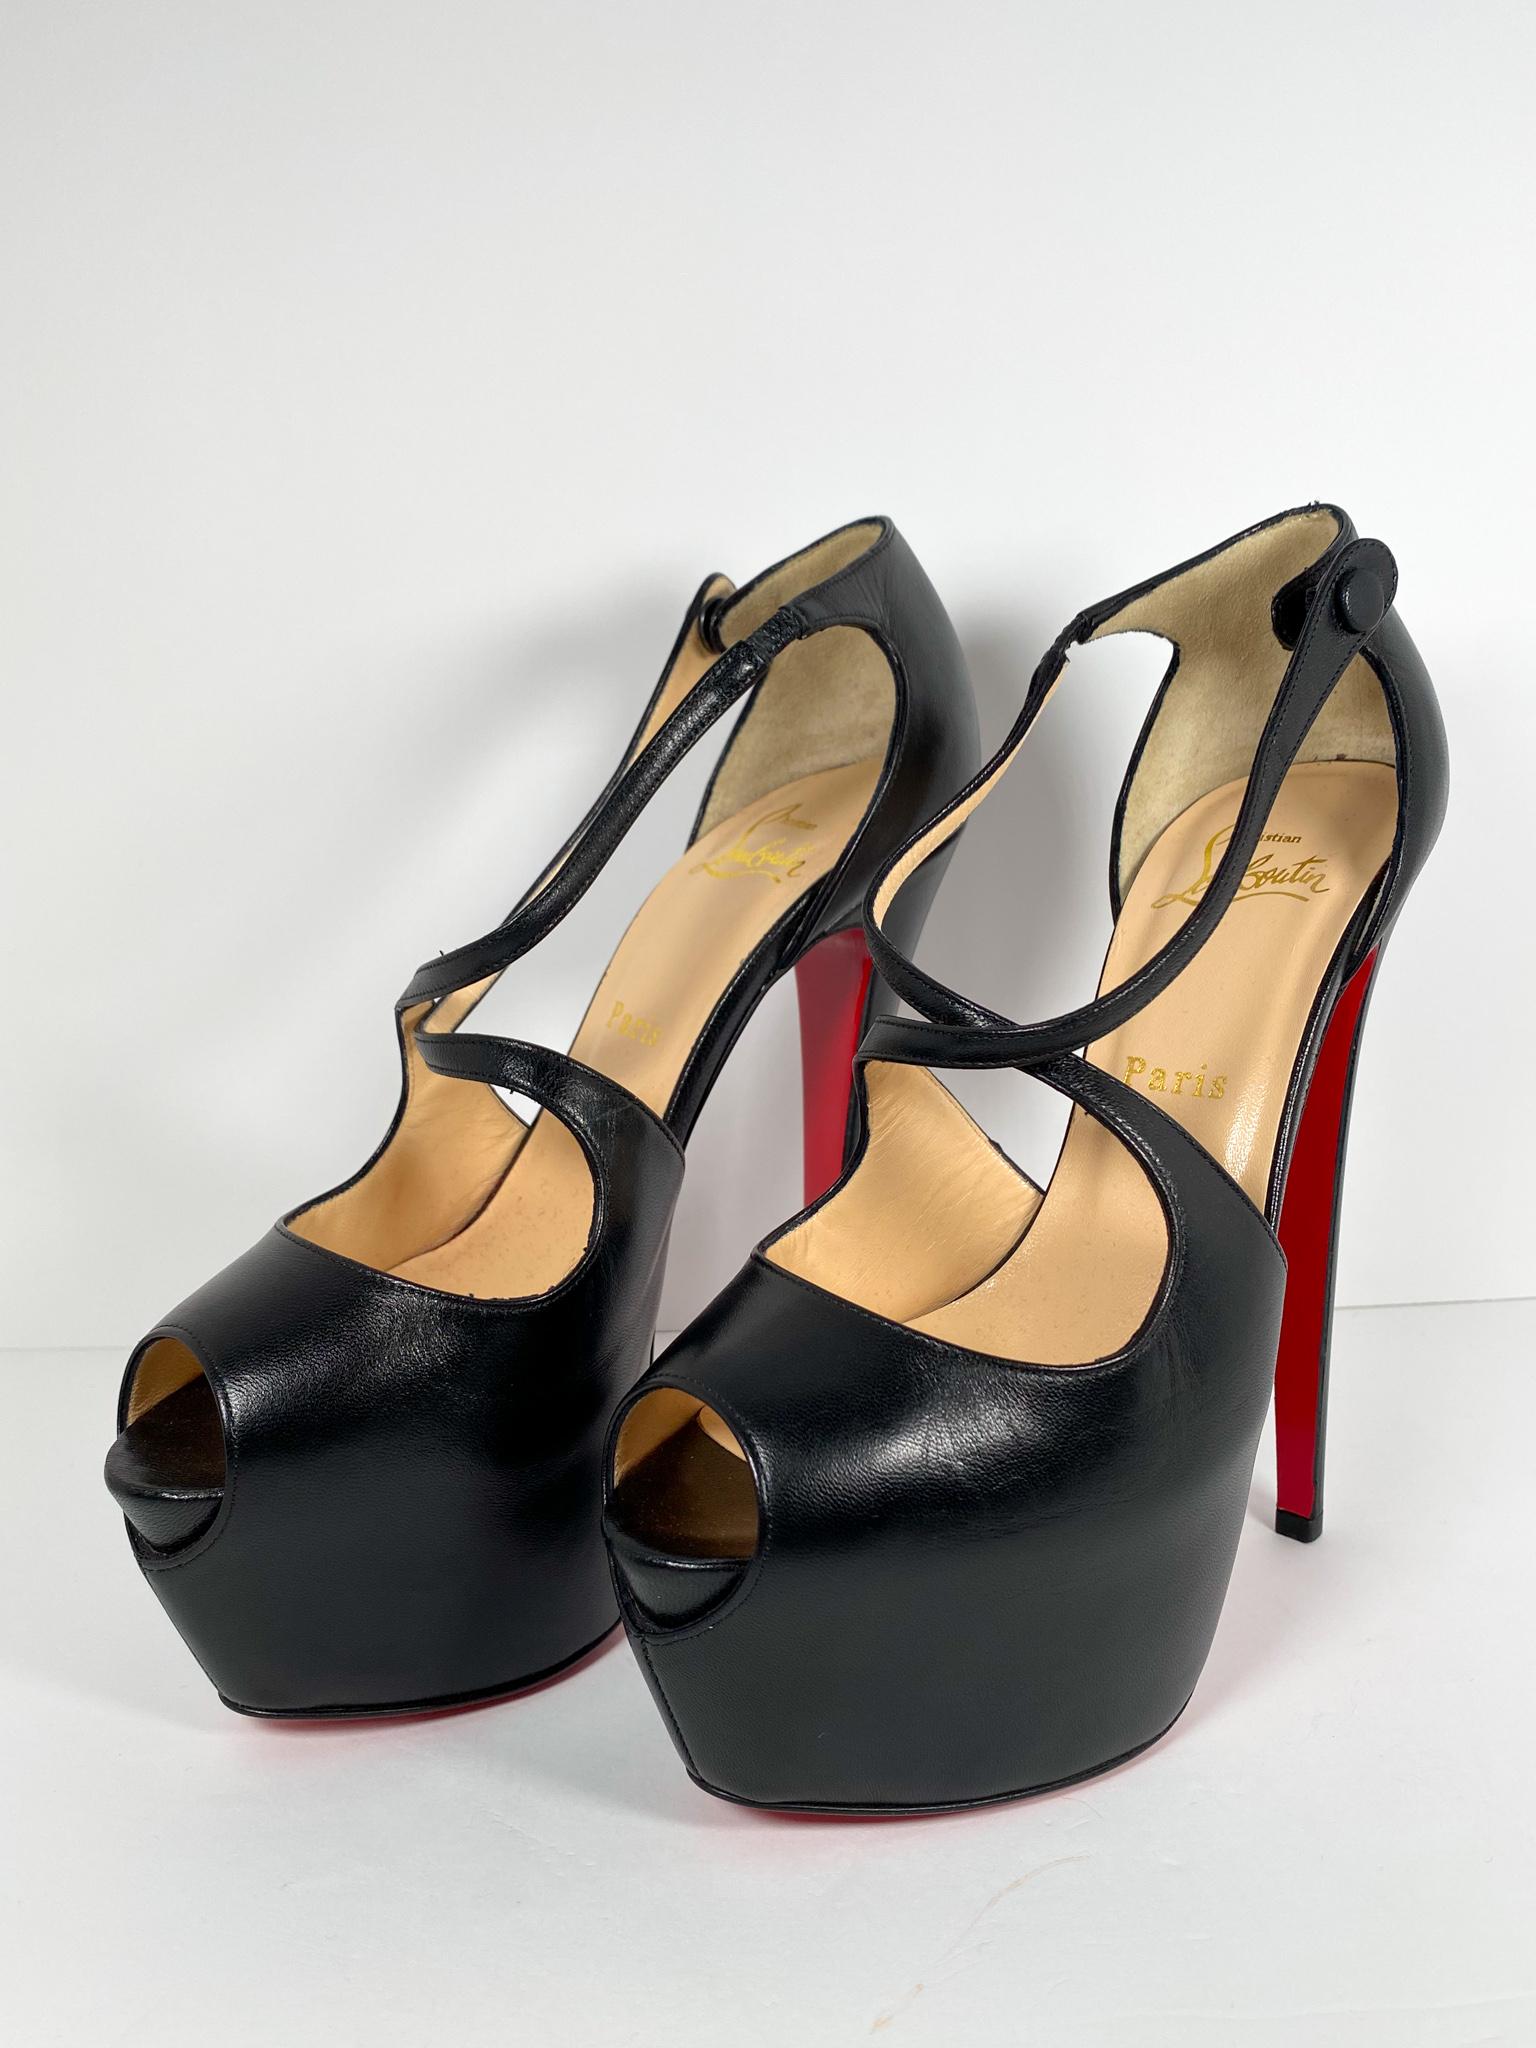 Christian Louboutin Cross Me 150 Heels In Good Condition For Sale In Annapolis, MD